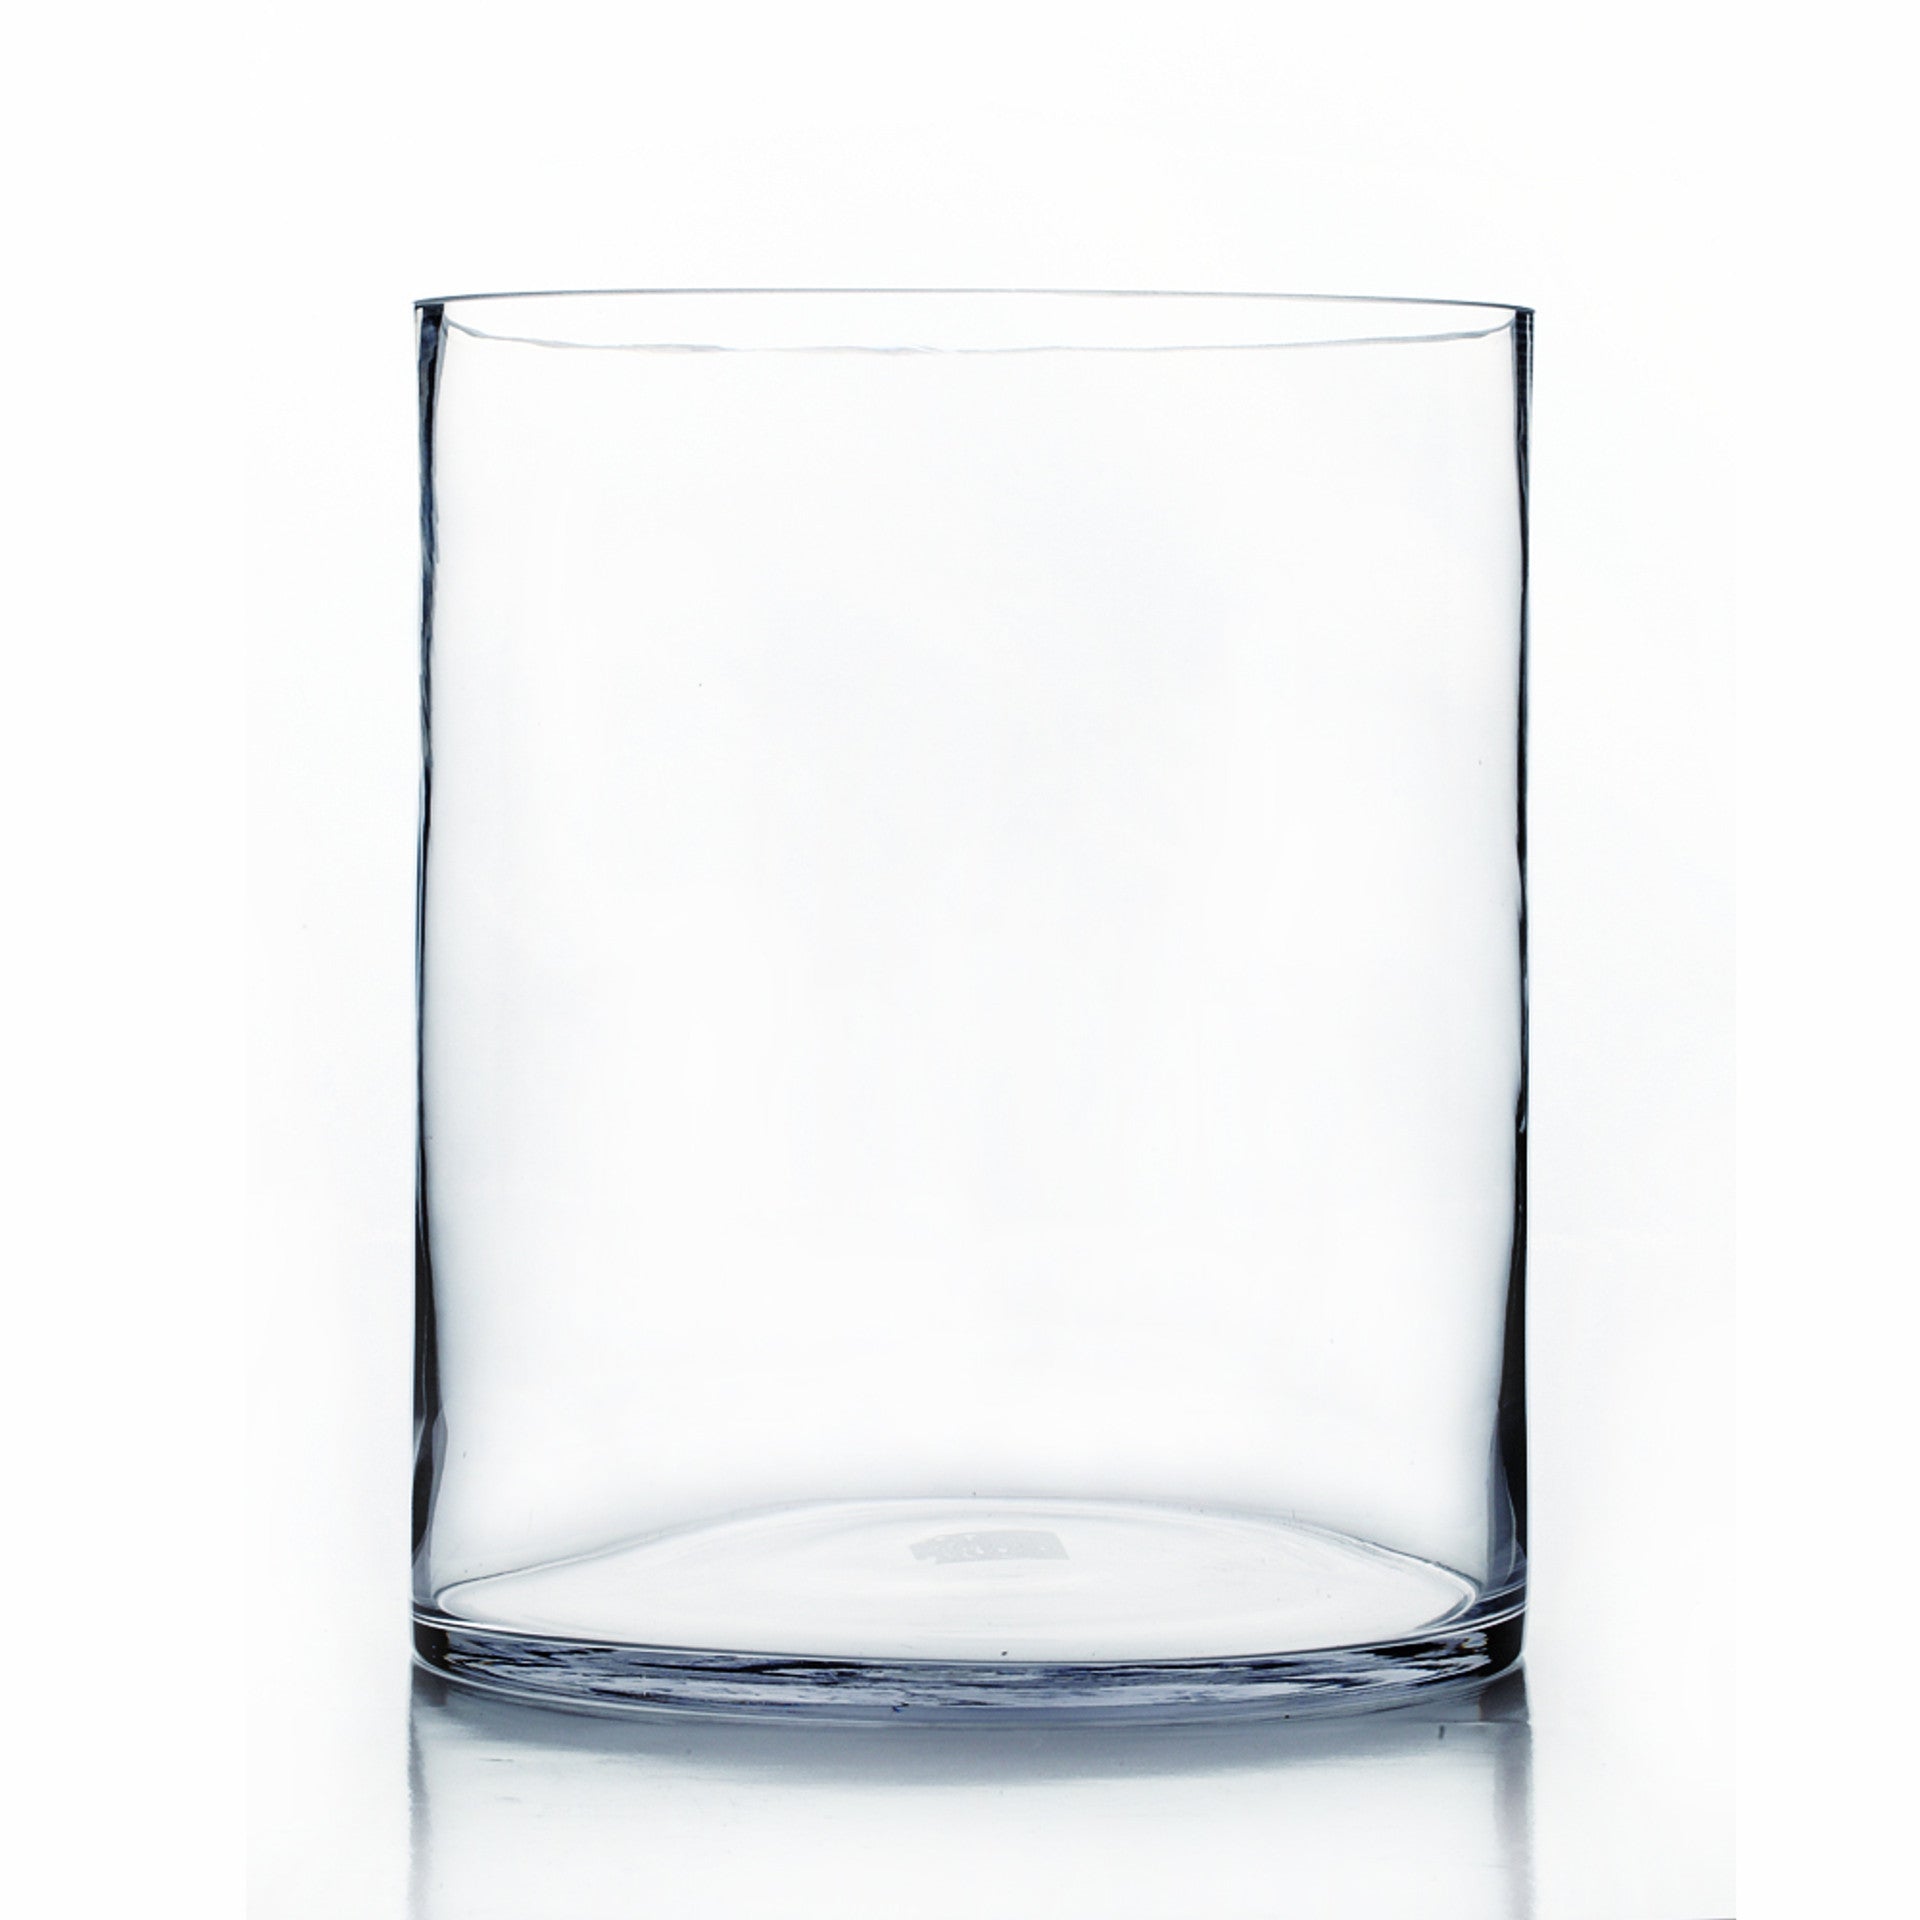 VCY0910 - Clear Cylinder Glass Vase - 9" X 10"